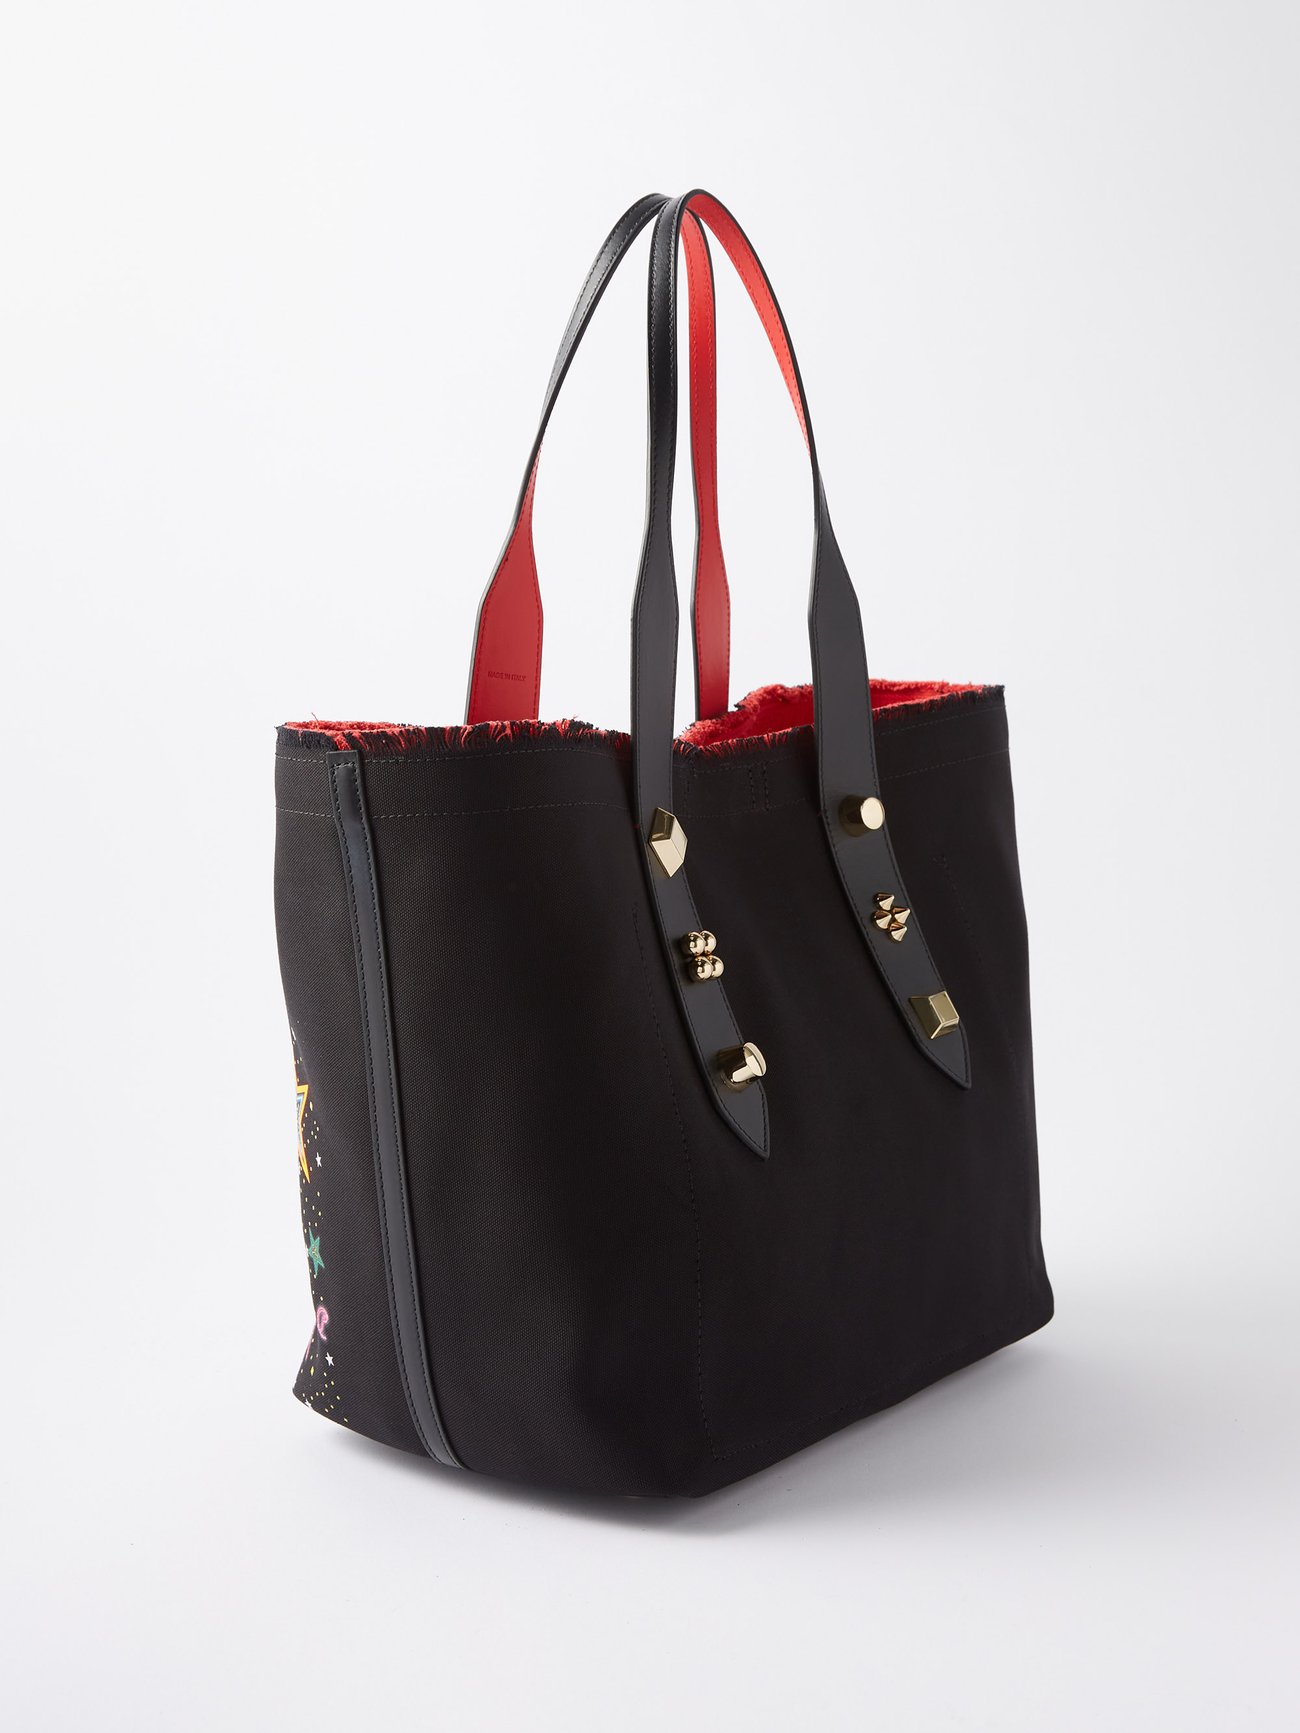 Luxury handbag - Frangibus Christian Louboutin small tote bag in white  fabric and colored inserts